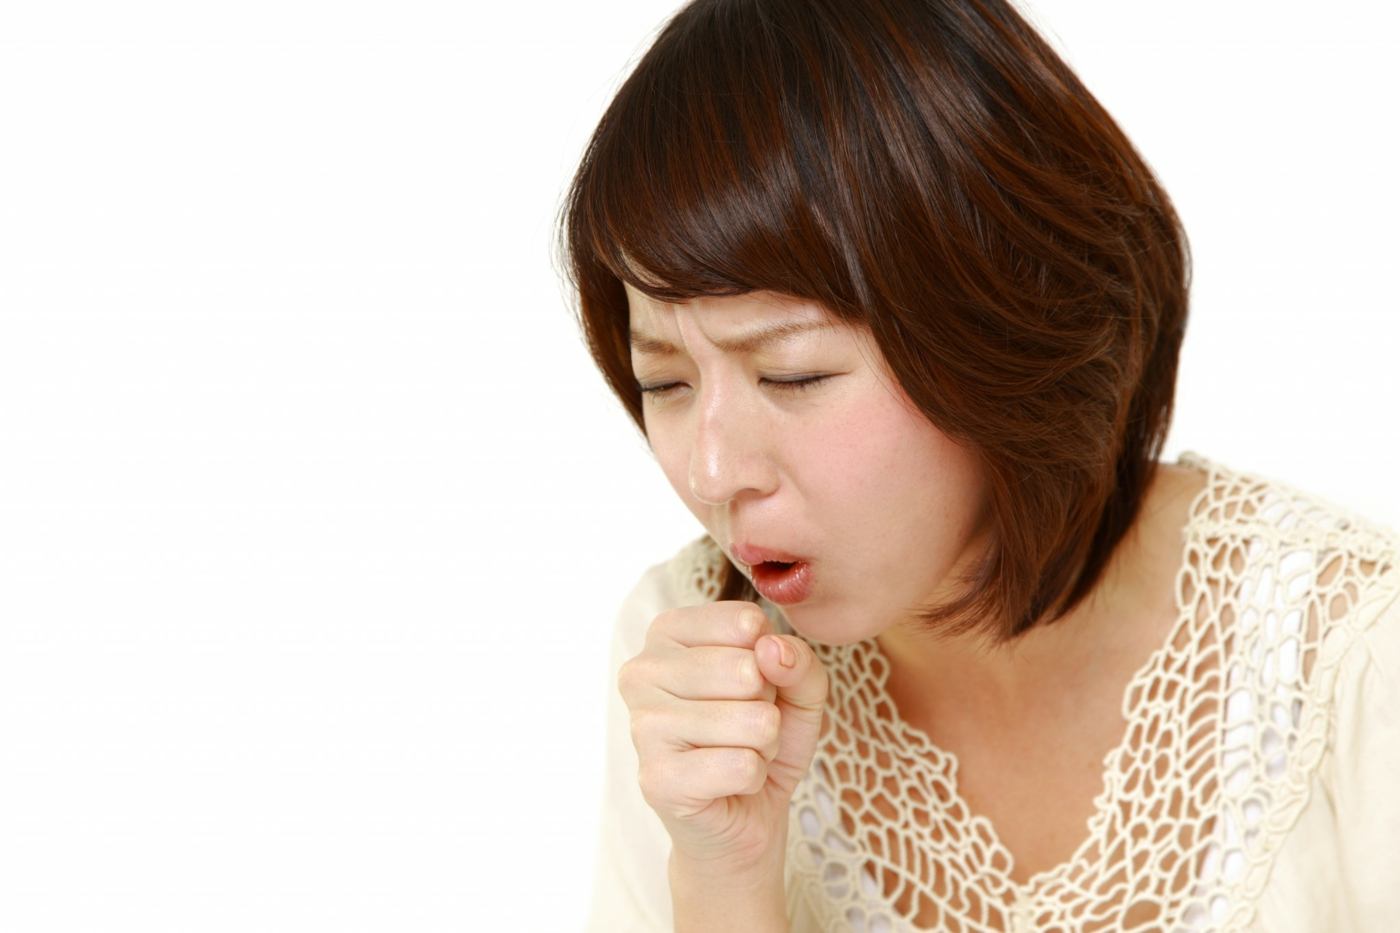 Home remedies against coughs and recipes to soothe the mucous membranes